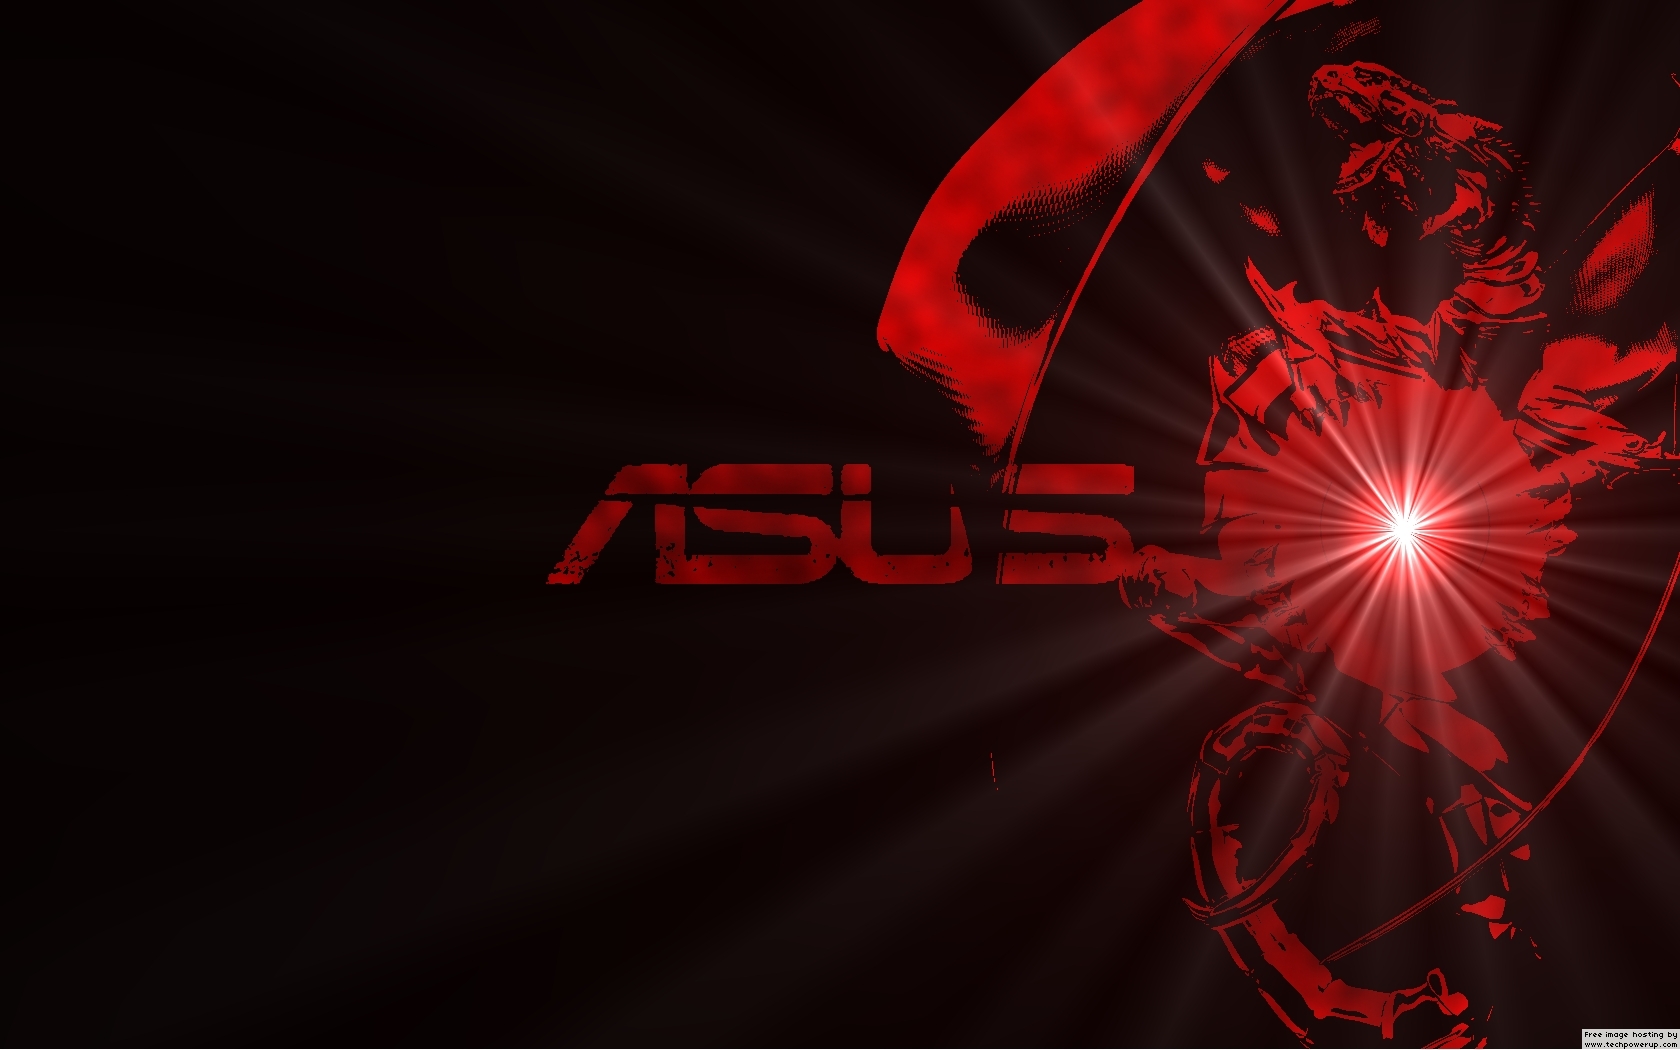 ASUS dragon wallpaper I madenothing specialcould use allot more